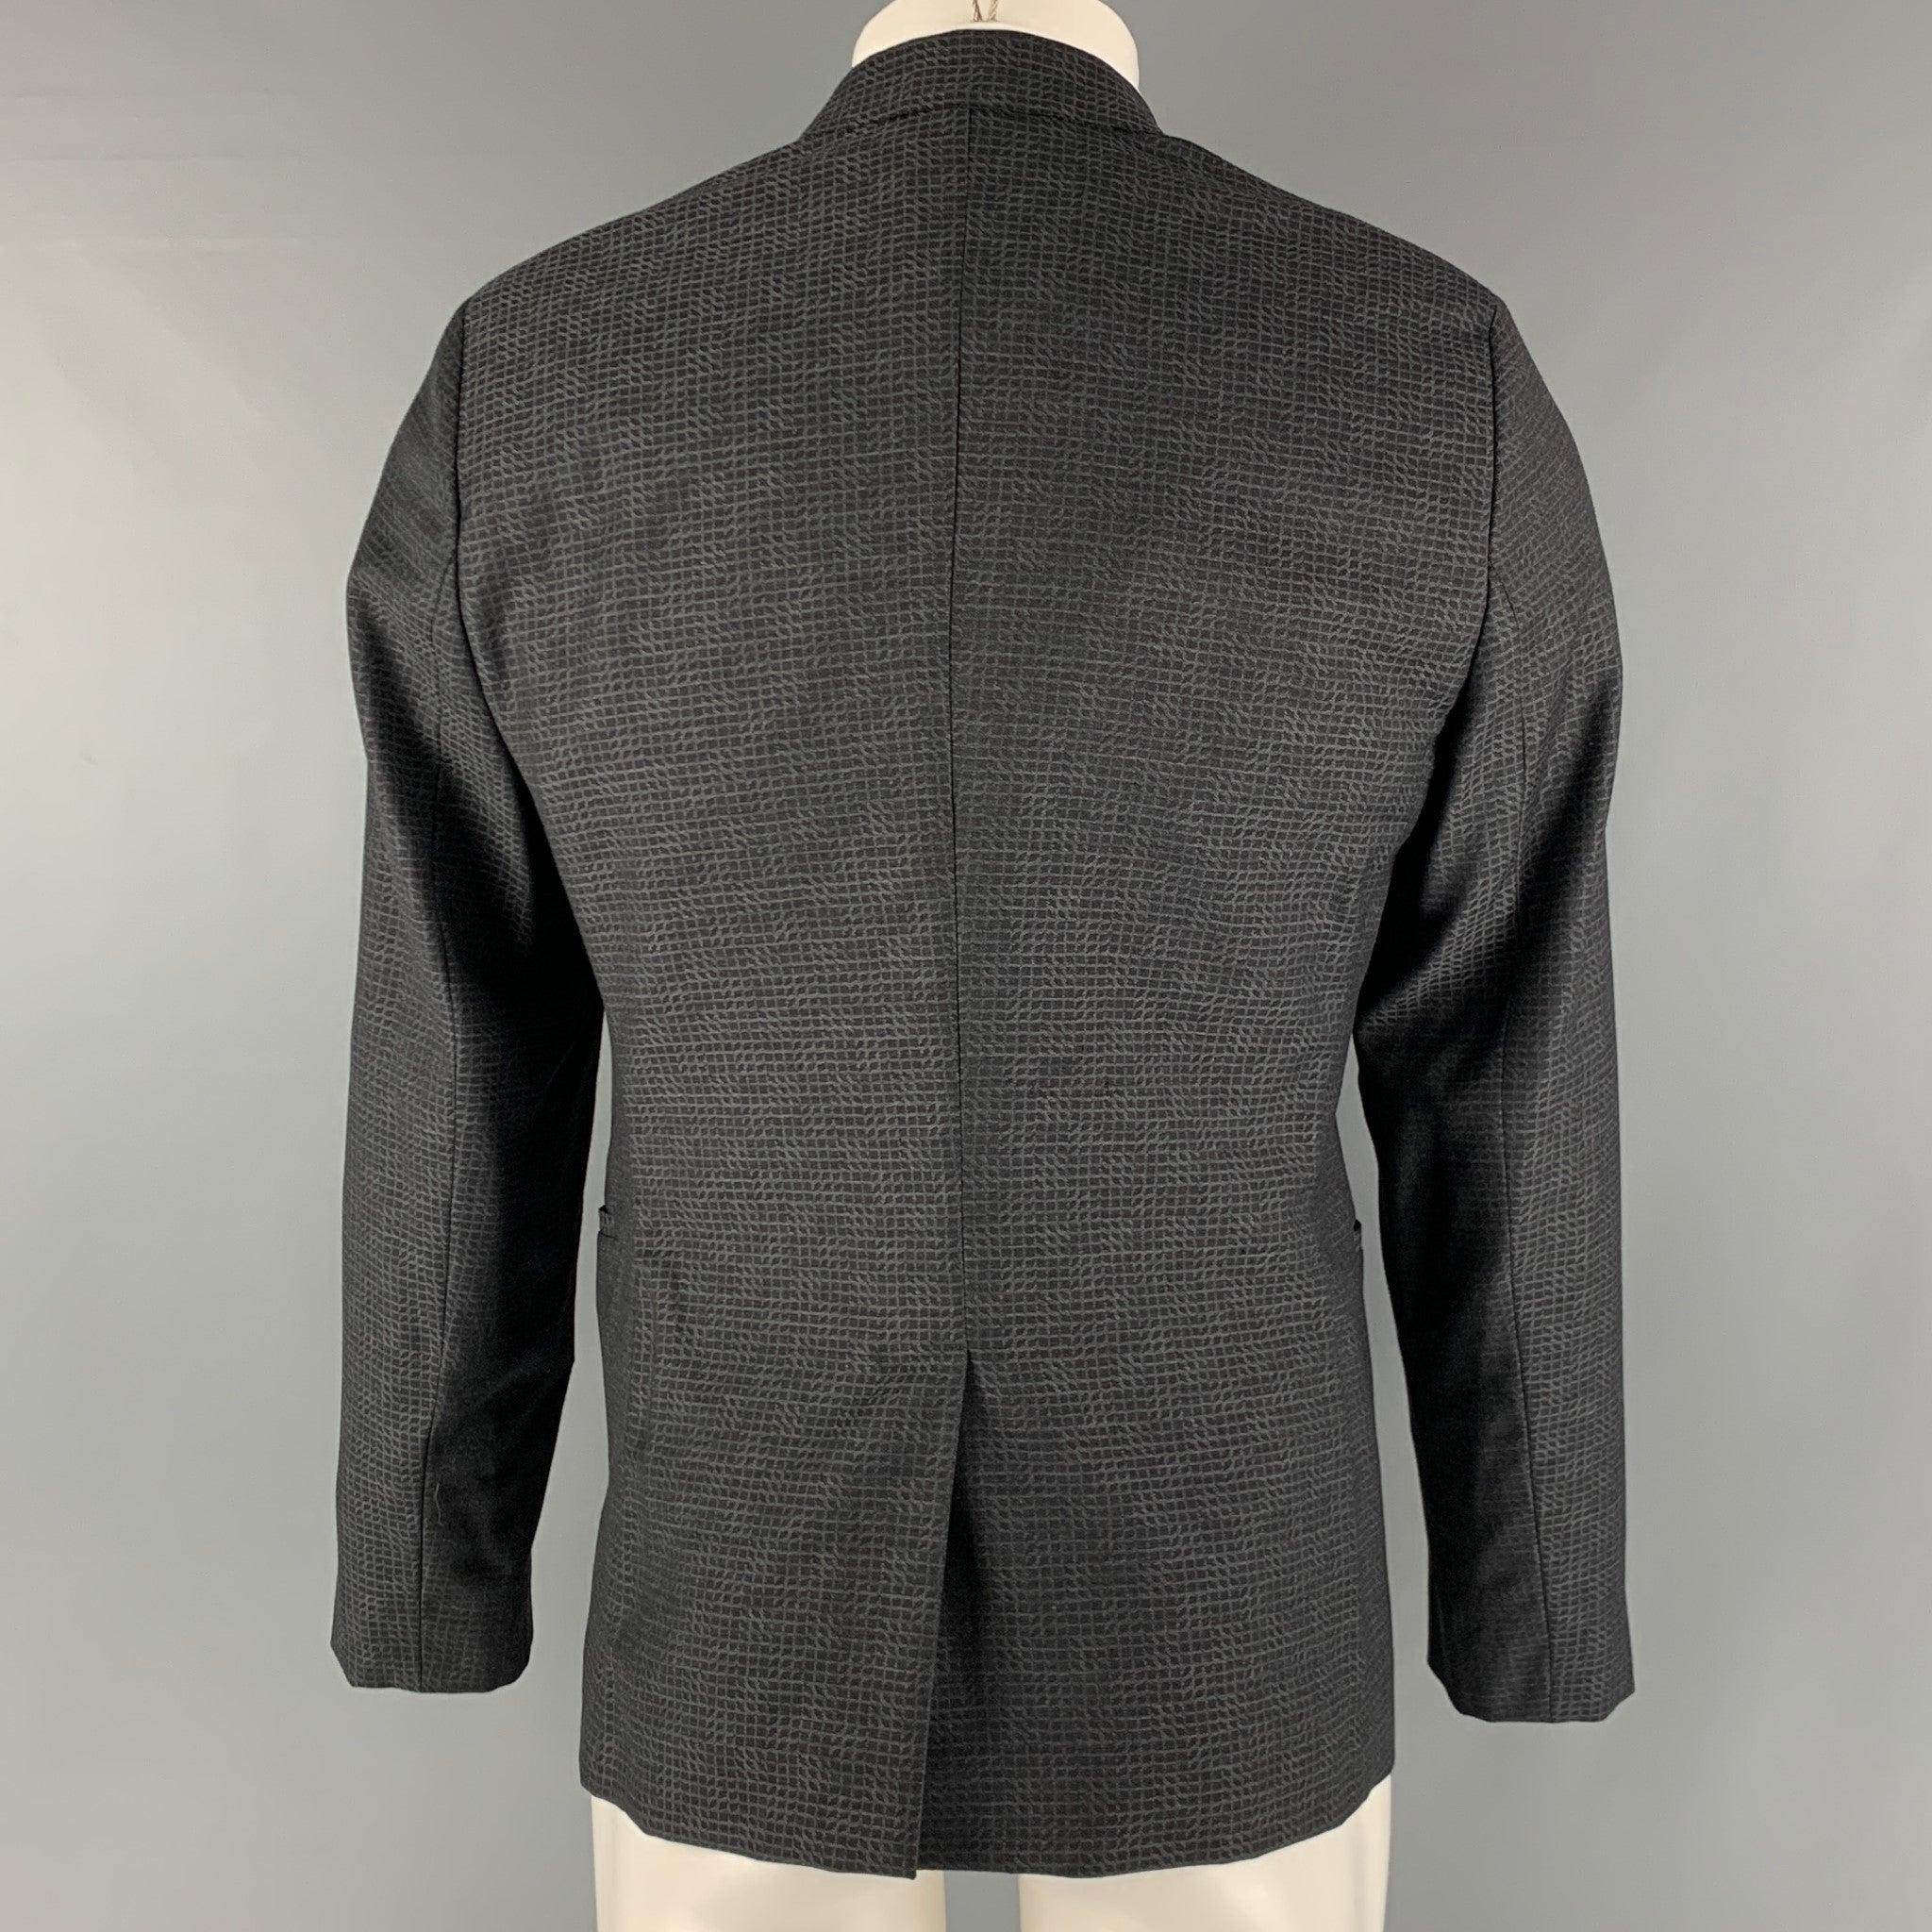 EMPORIO ARMANI Size 38 Charcoal Grey Wool Notch Lapel Sport Coat In Excellent Condition For Sale In San Francisco, CA